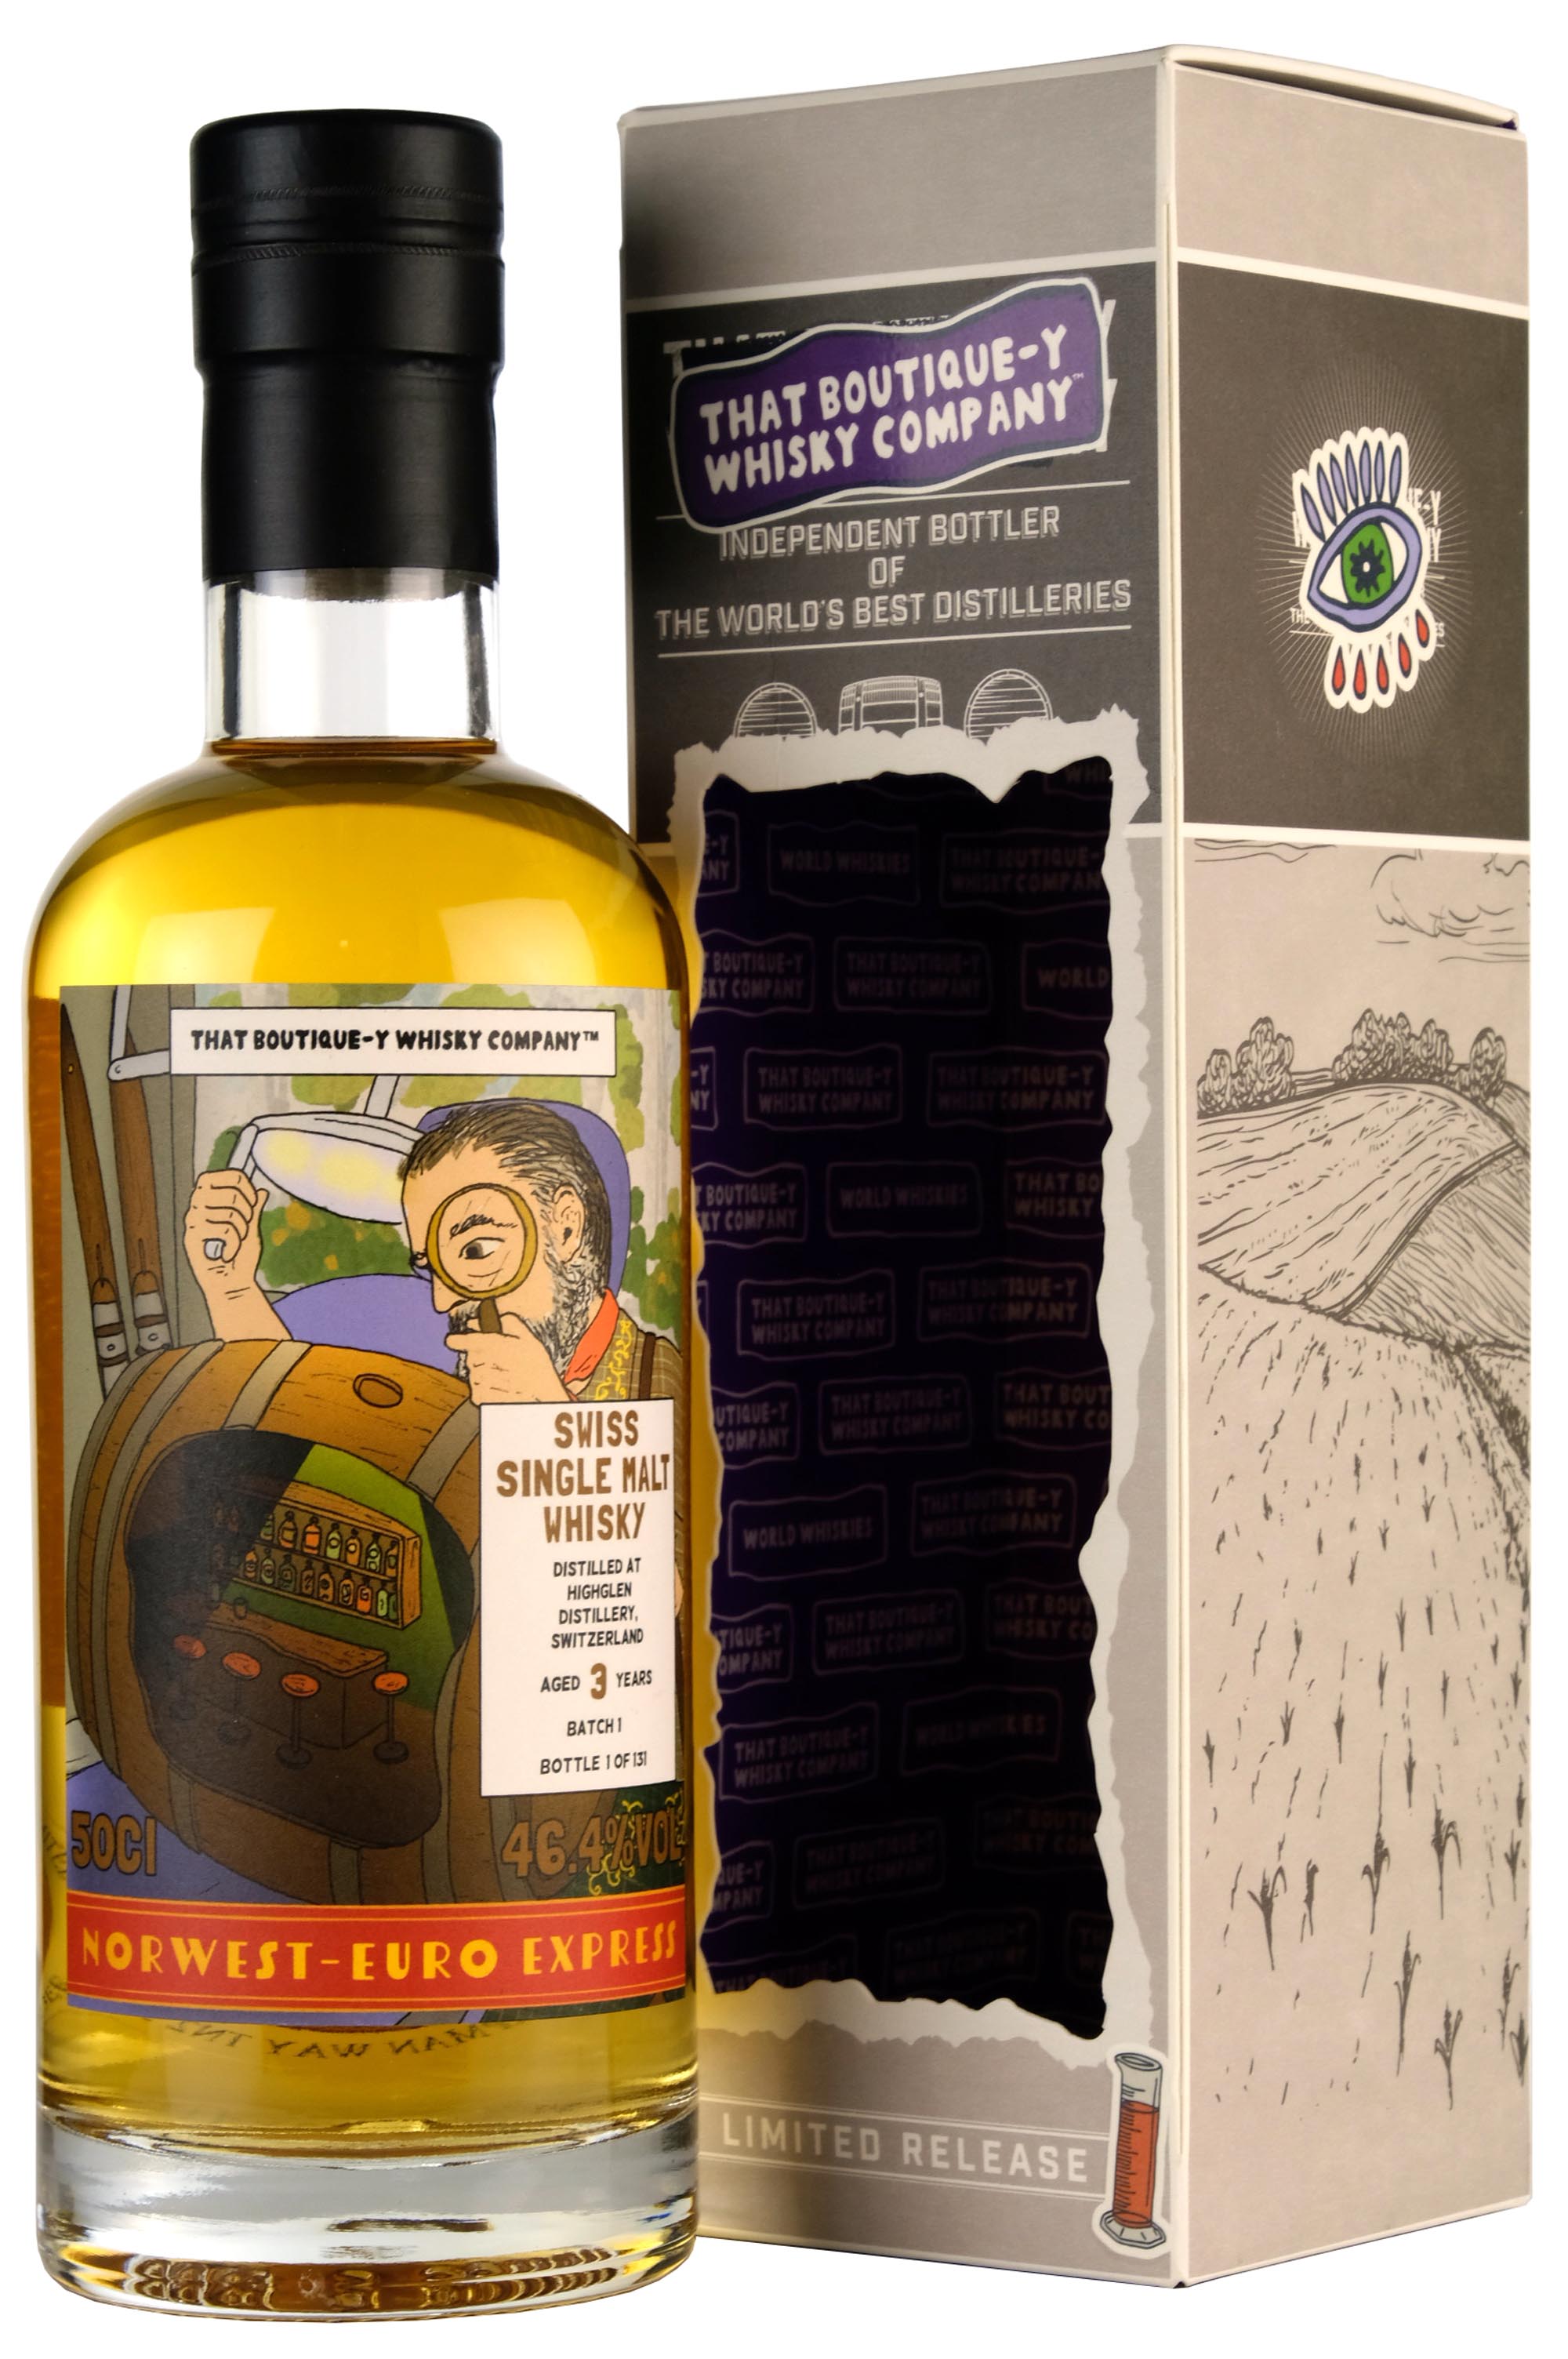 HighGlen 3 Year Old | That Boutique-y Whisky Company Batch 1